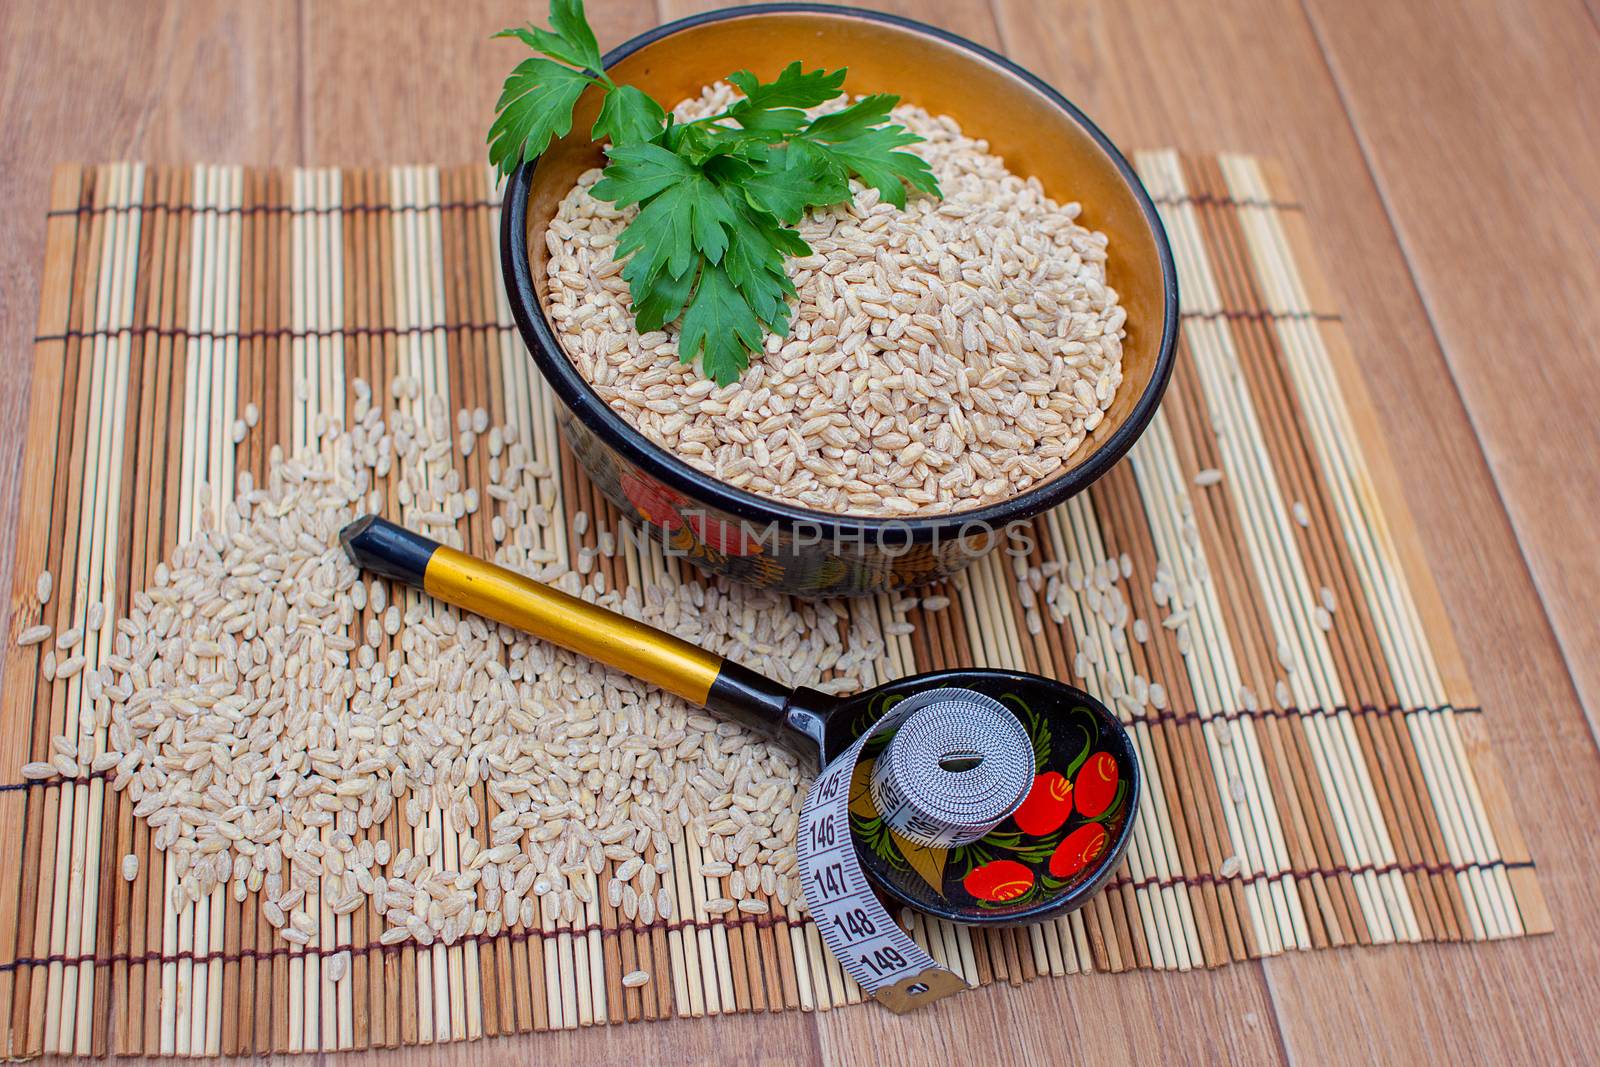 Pearl barley in a cup, nearby a wooden spoon and a centimetric tape